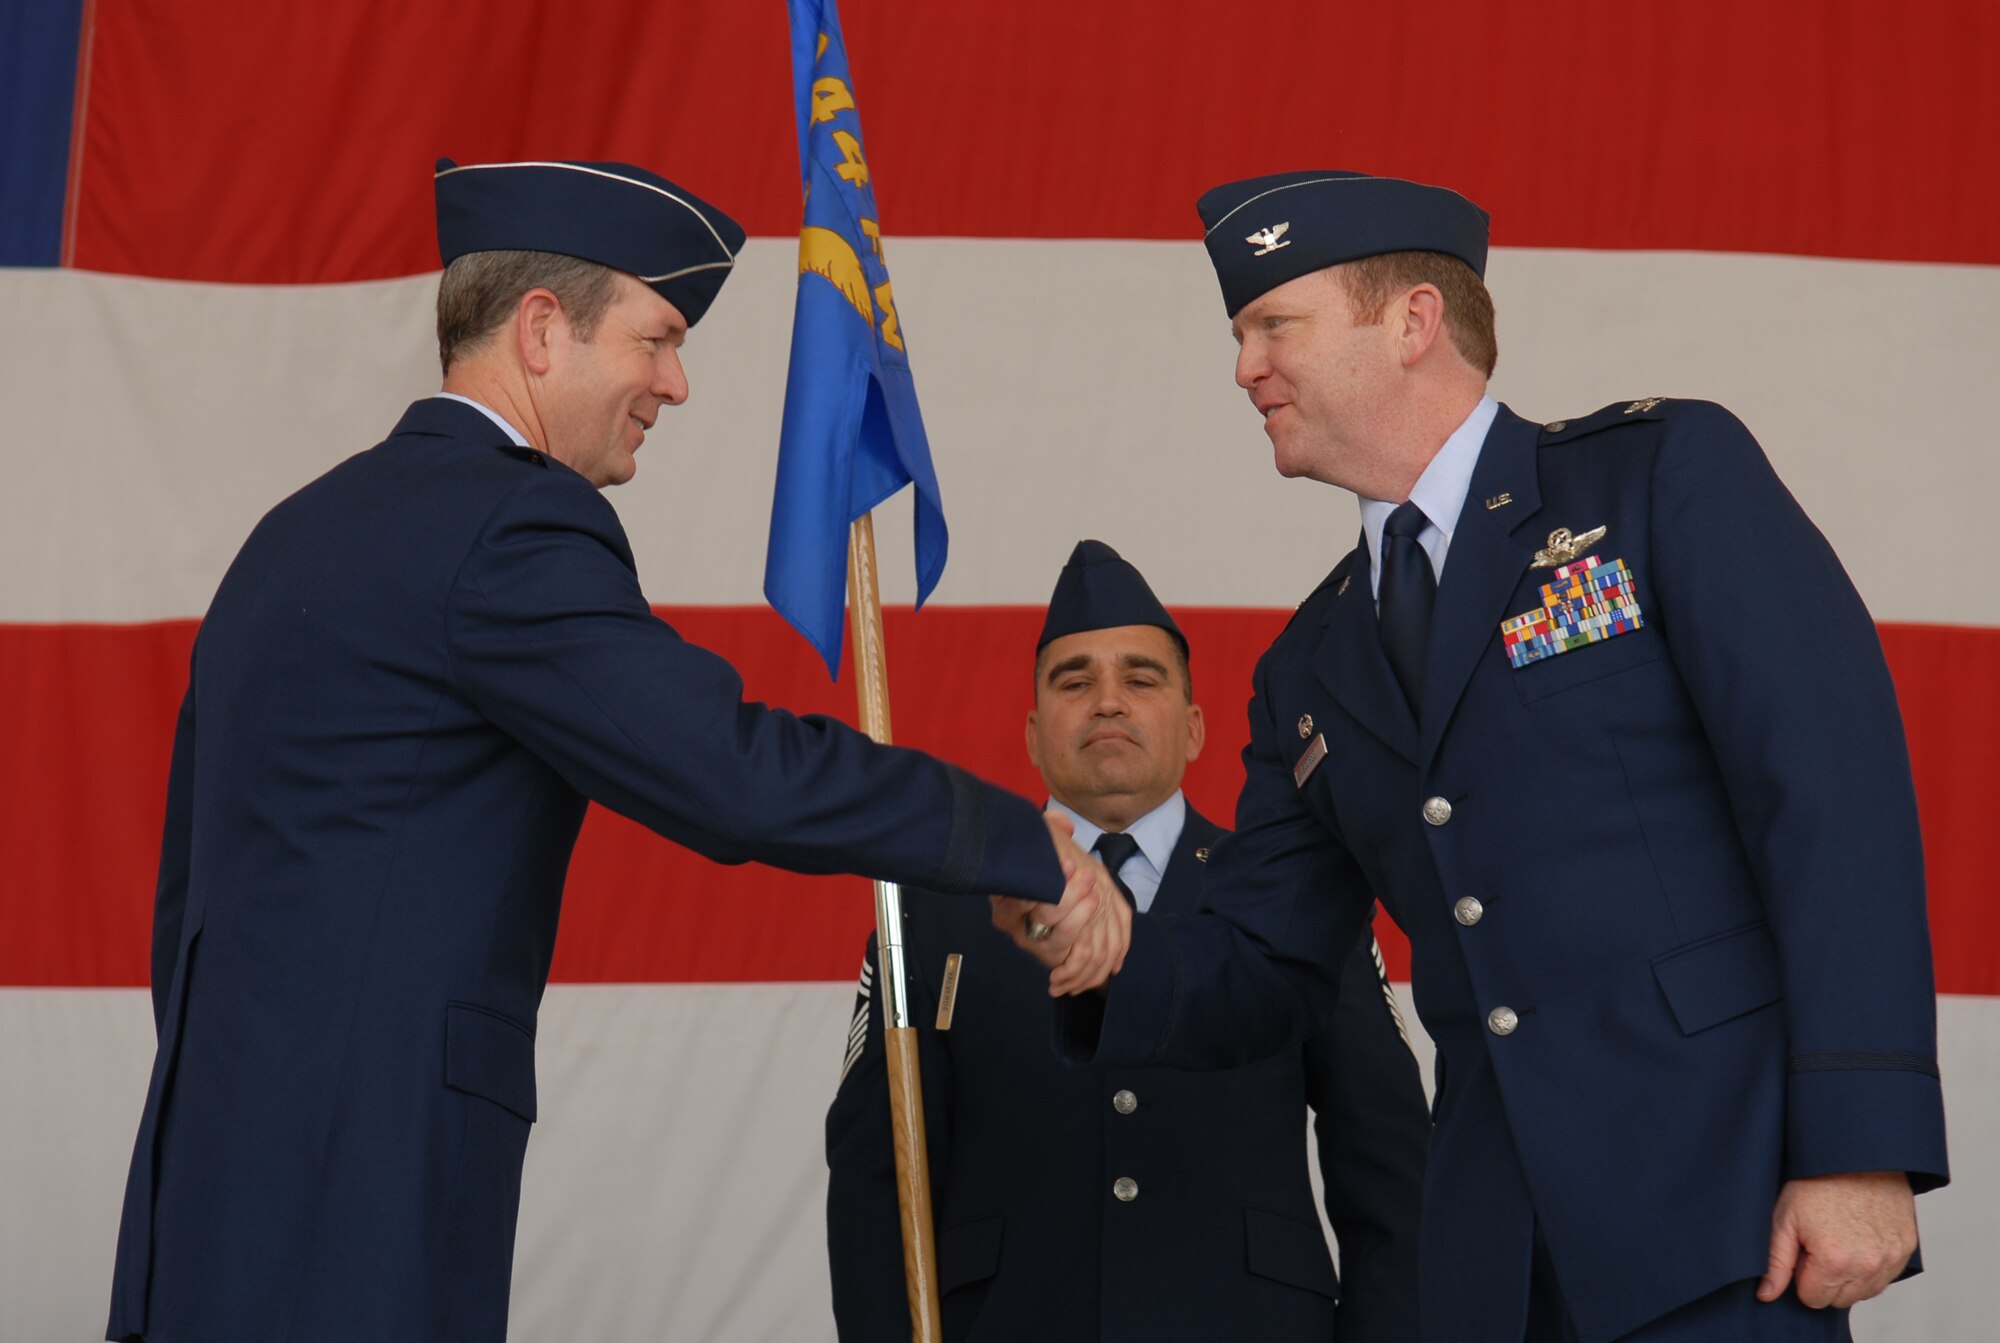 Brig. Gen. Thomas Coon, 10th Air Force commander, shakes the hand of Col. Richard Scobee as he takes command of the 944th Fighter Wing. Colonel Scobee has more than 3,800 flying hours, including 248 combat hours.  Photo by Airman 1st Class Gustavo Gonzalez.